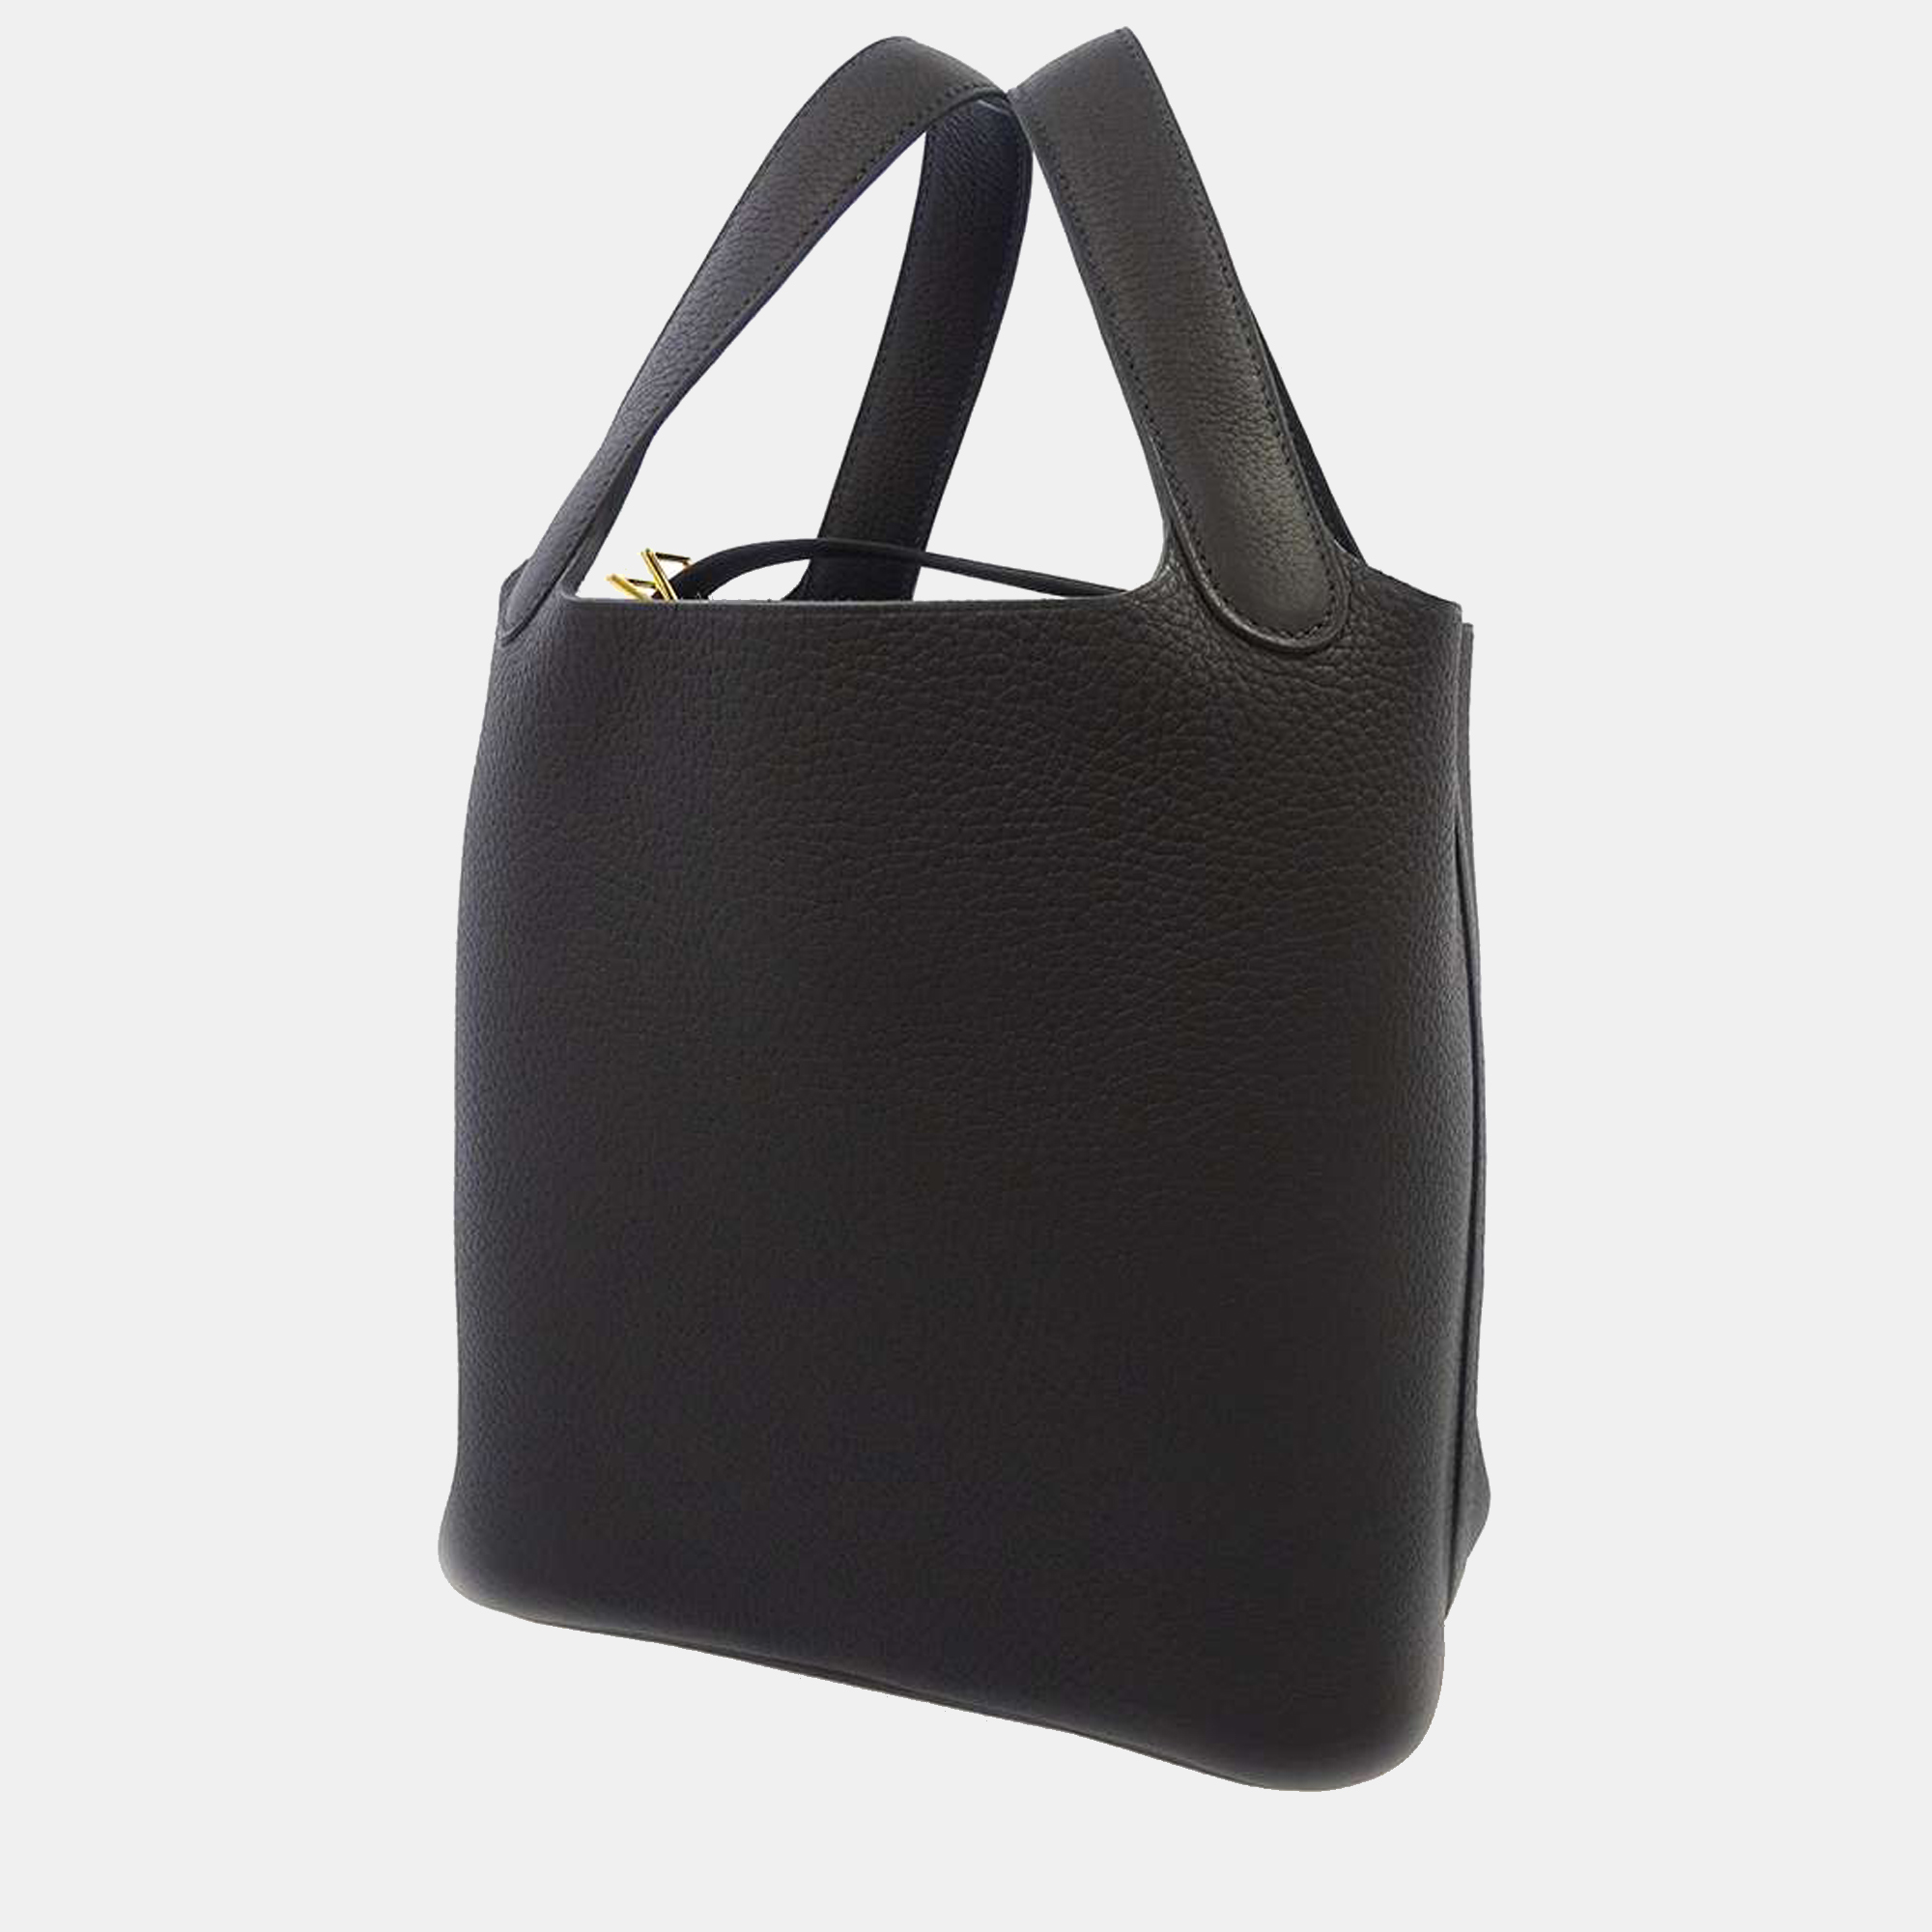 Hermes Black Taurillon Clemence Leather Picotin Lock PM Tote Bag